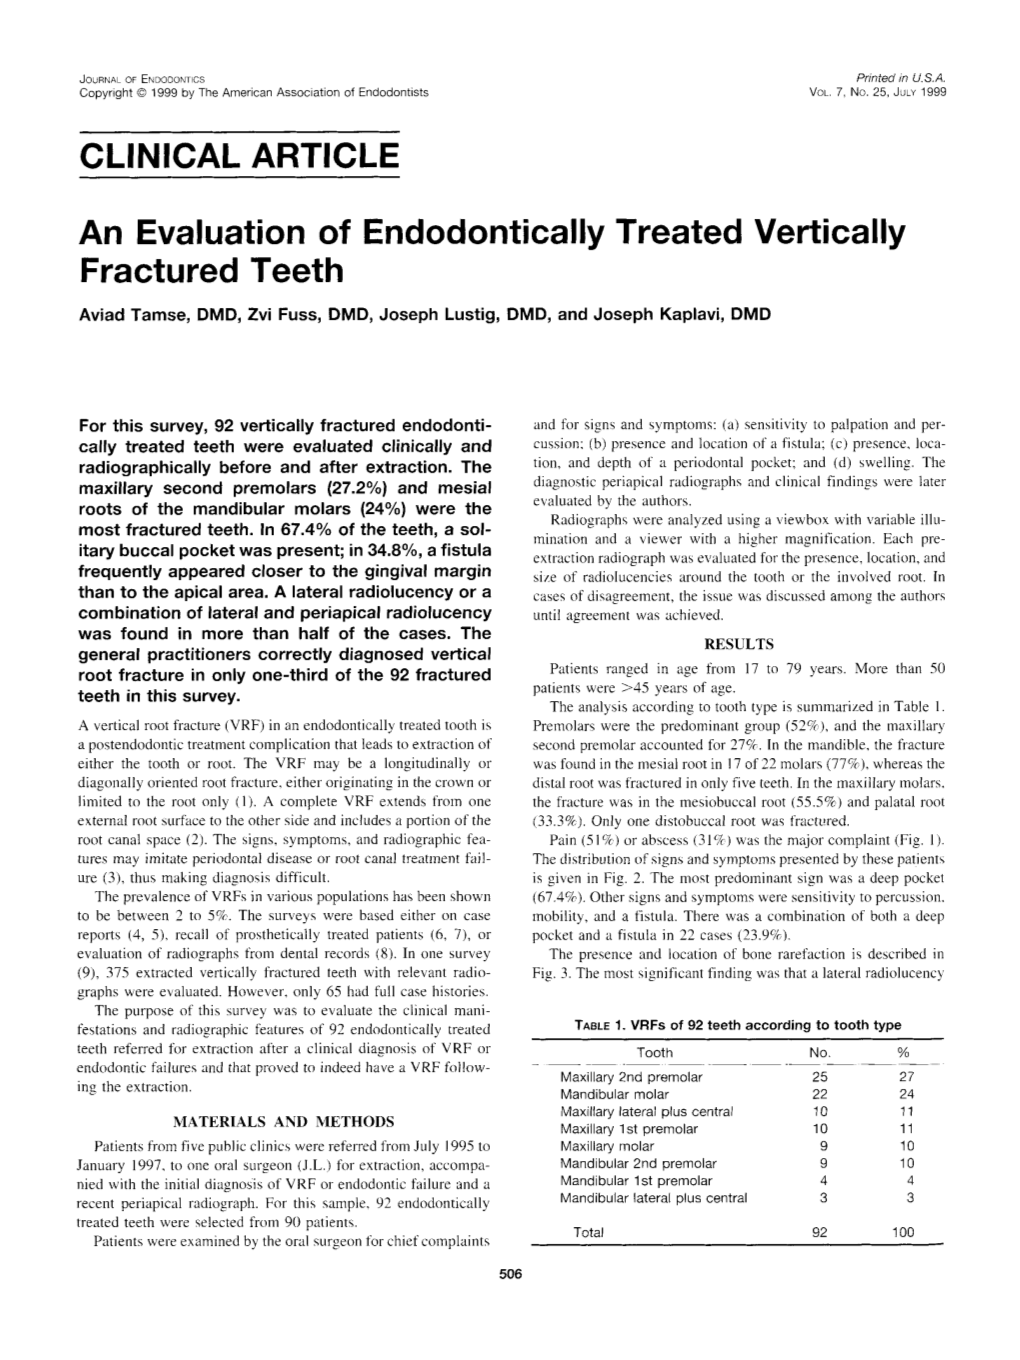 CLINICAL ARTICLE an Evaluation of Endodontically Treated Vertically